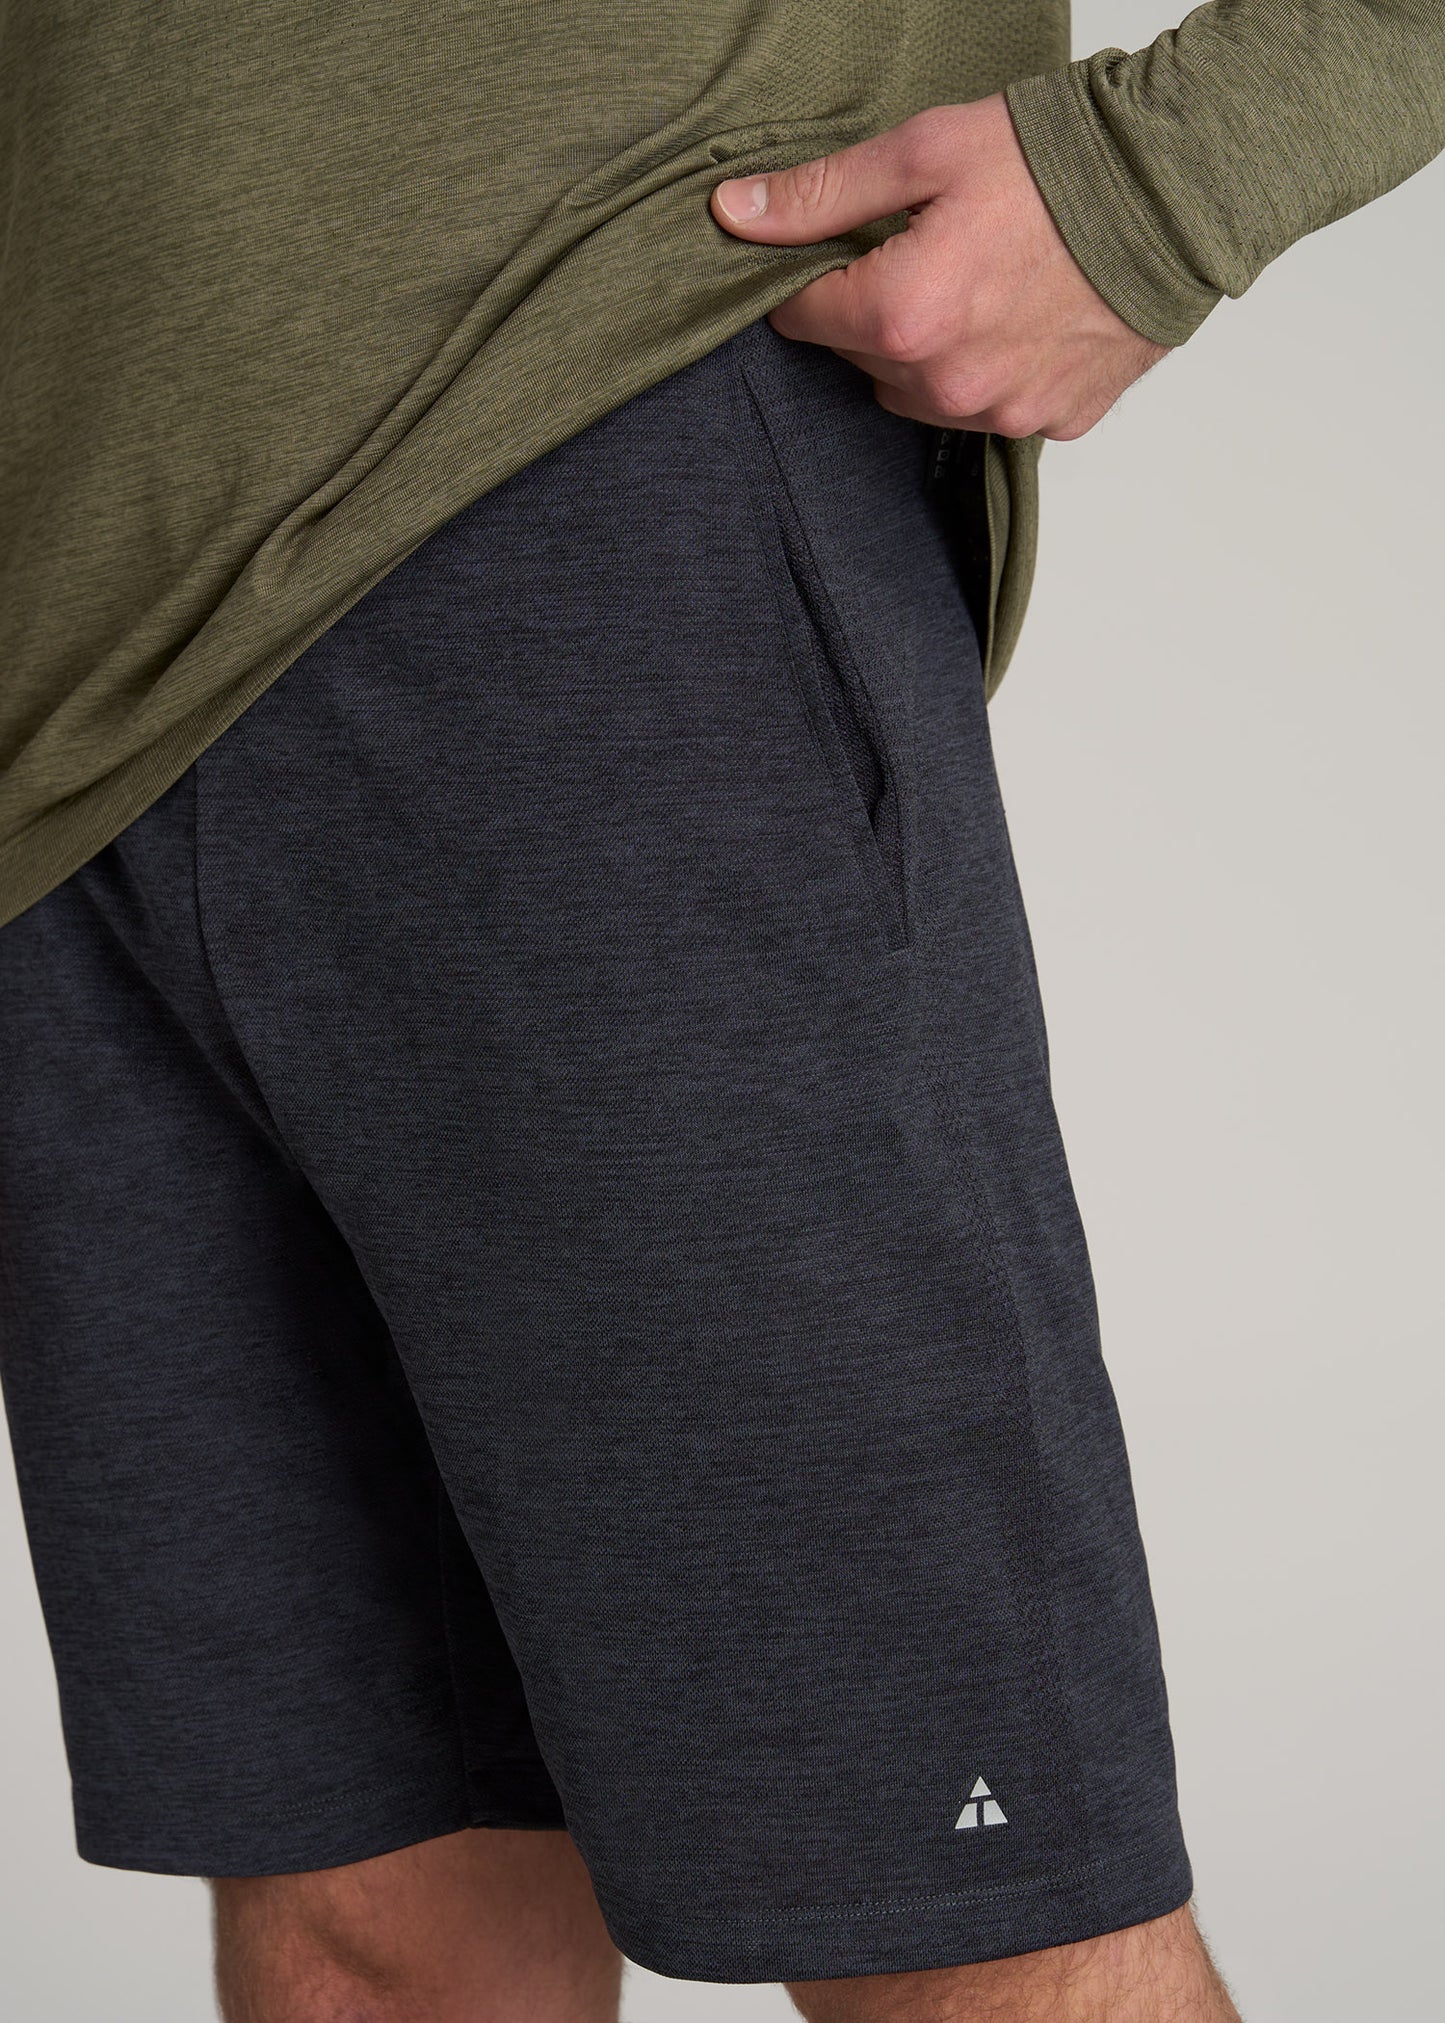     American-Tall-Men-Performance-Engineered-Athletic-Shorts-Charcoal-Mix-detail